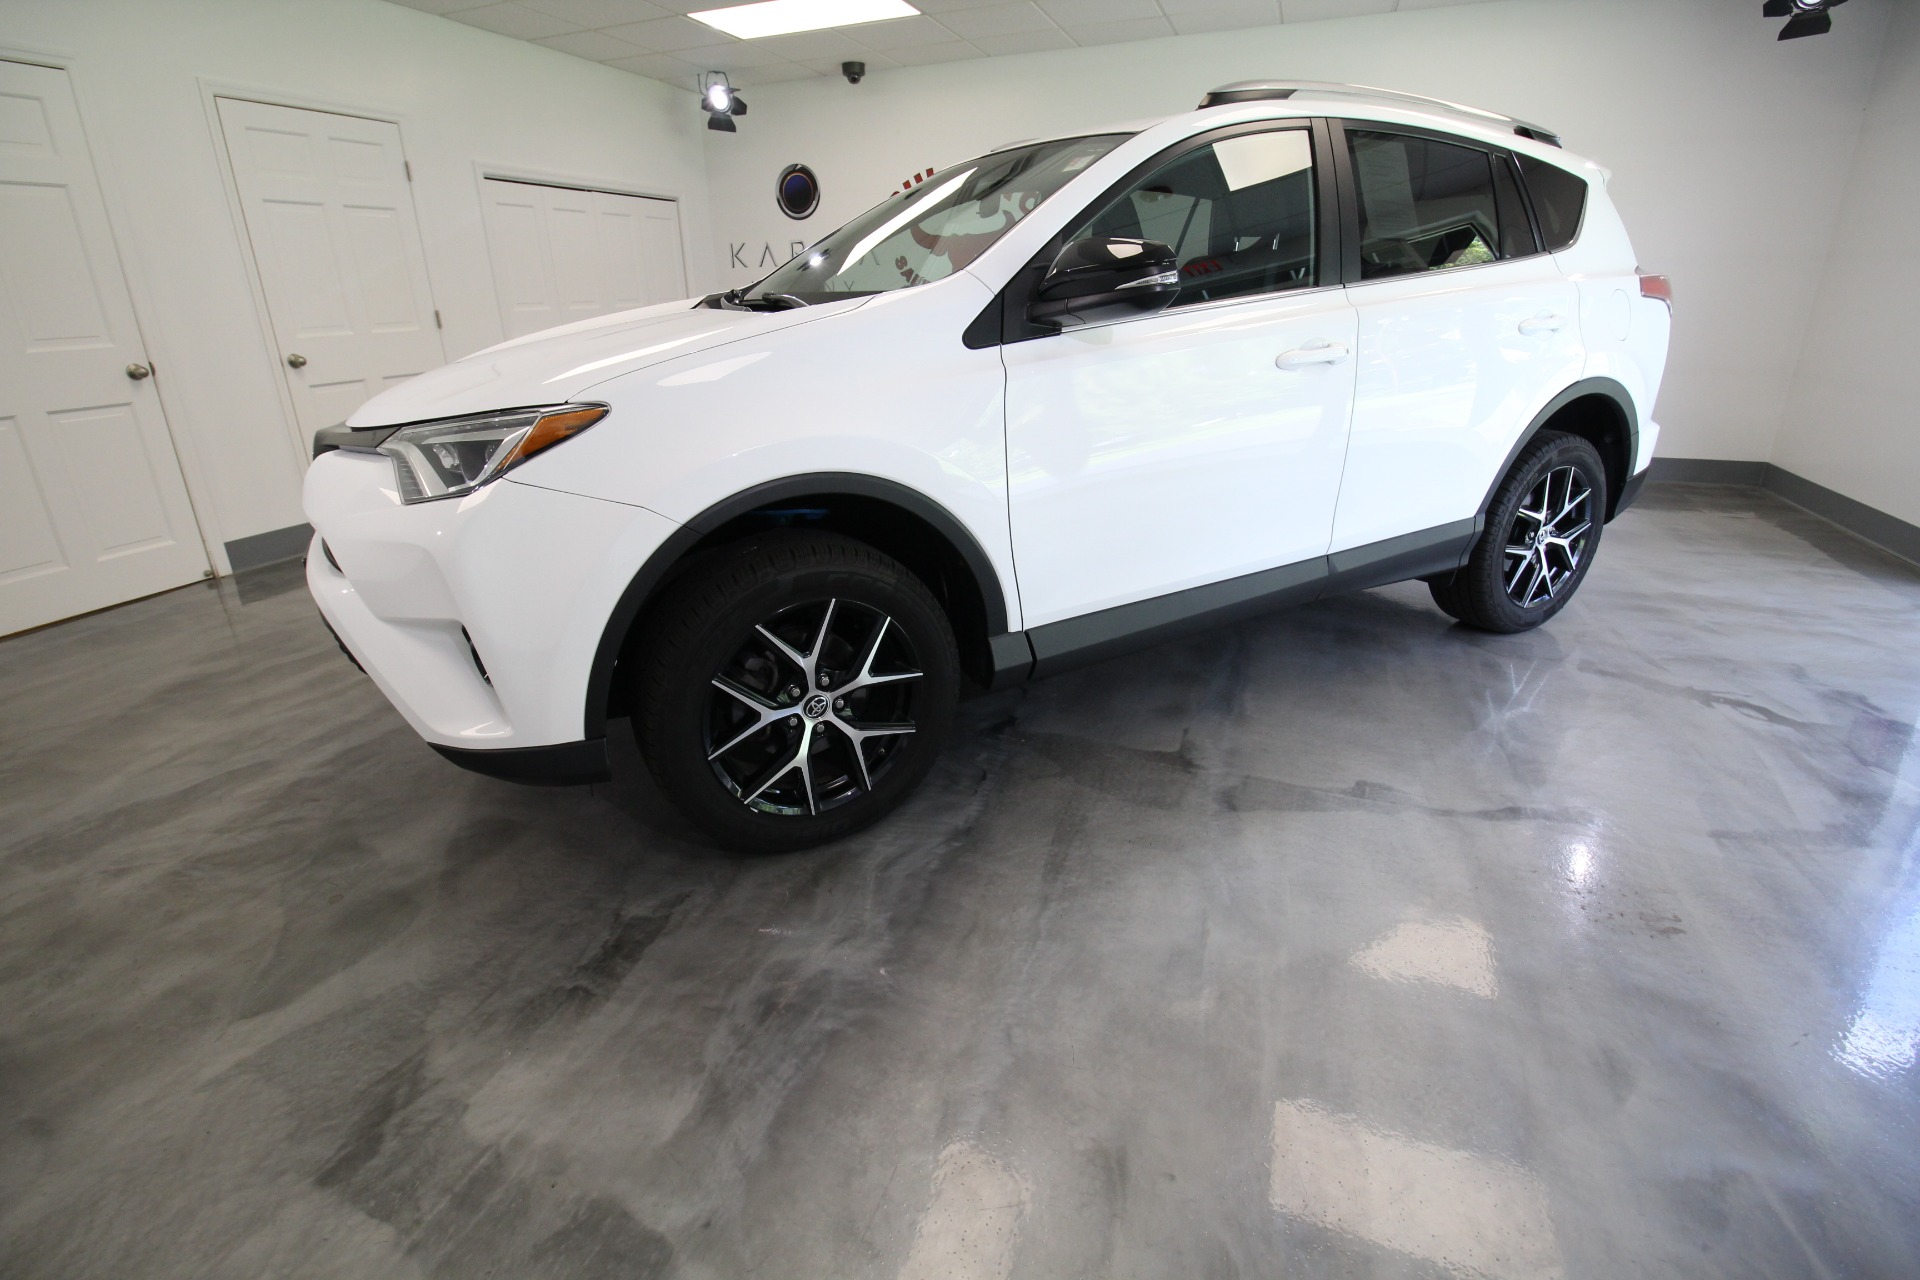 Used 2017 Super White Toyota RAV4 SE 4WD Clean - Low Miles - 2 Owner | Albany, NY